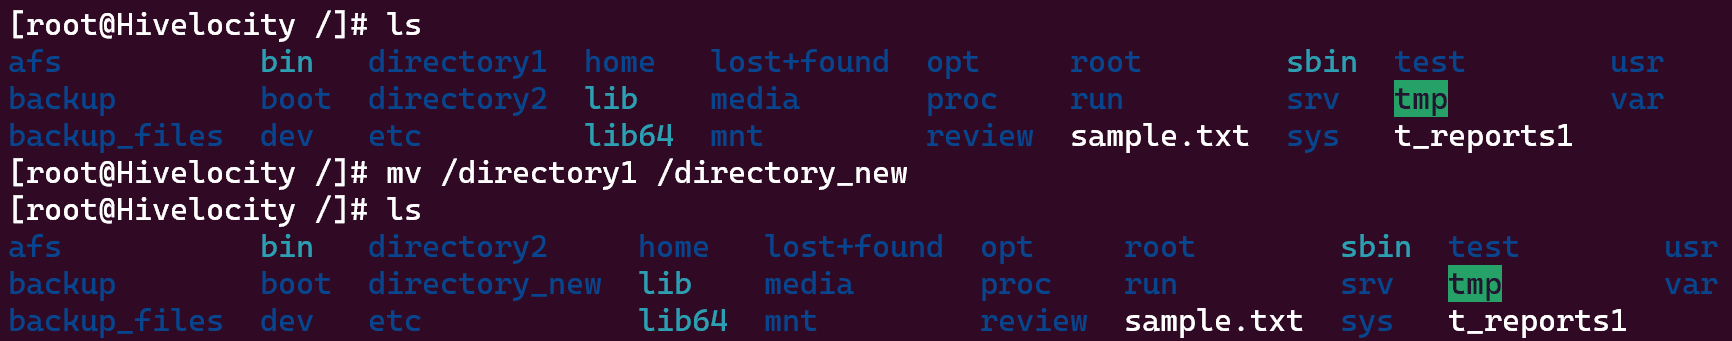 Screenshot showing the results of the command mv /directory1 /directory_new.